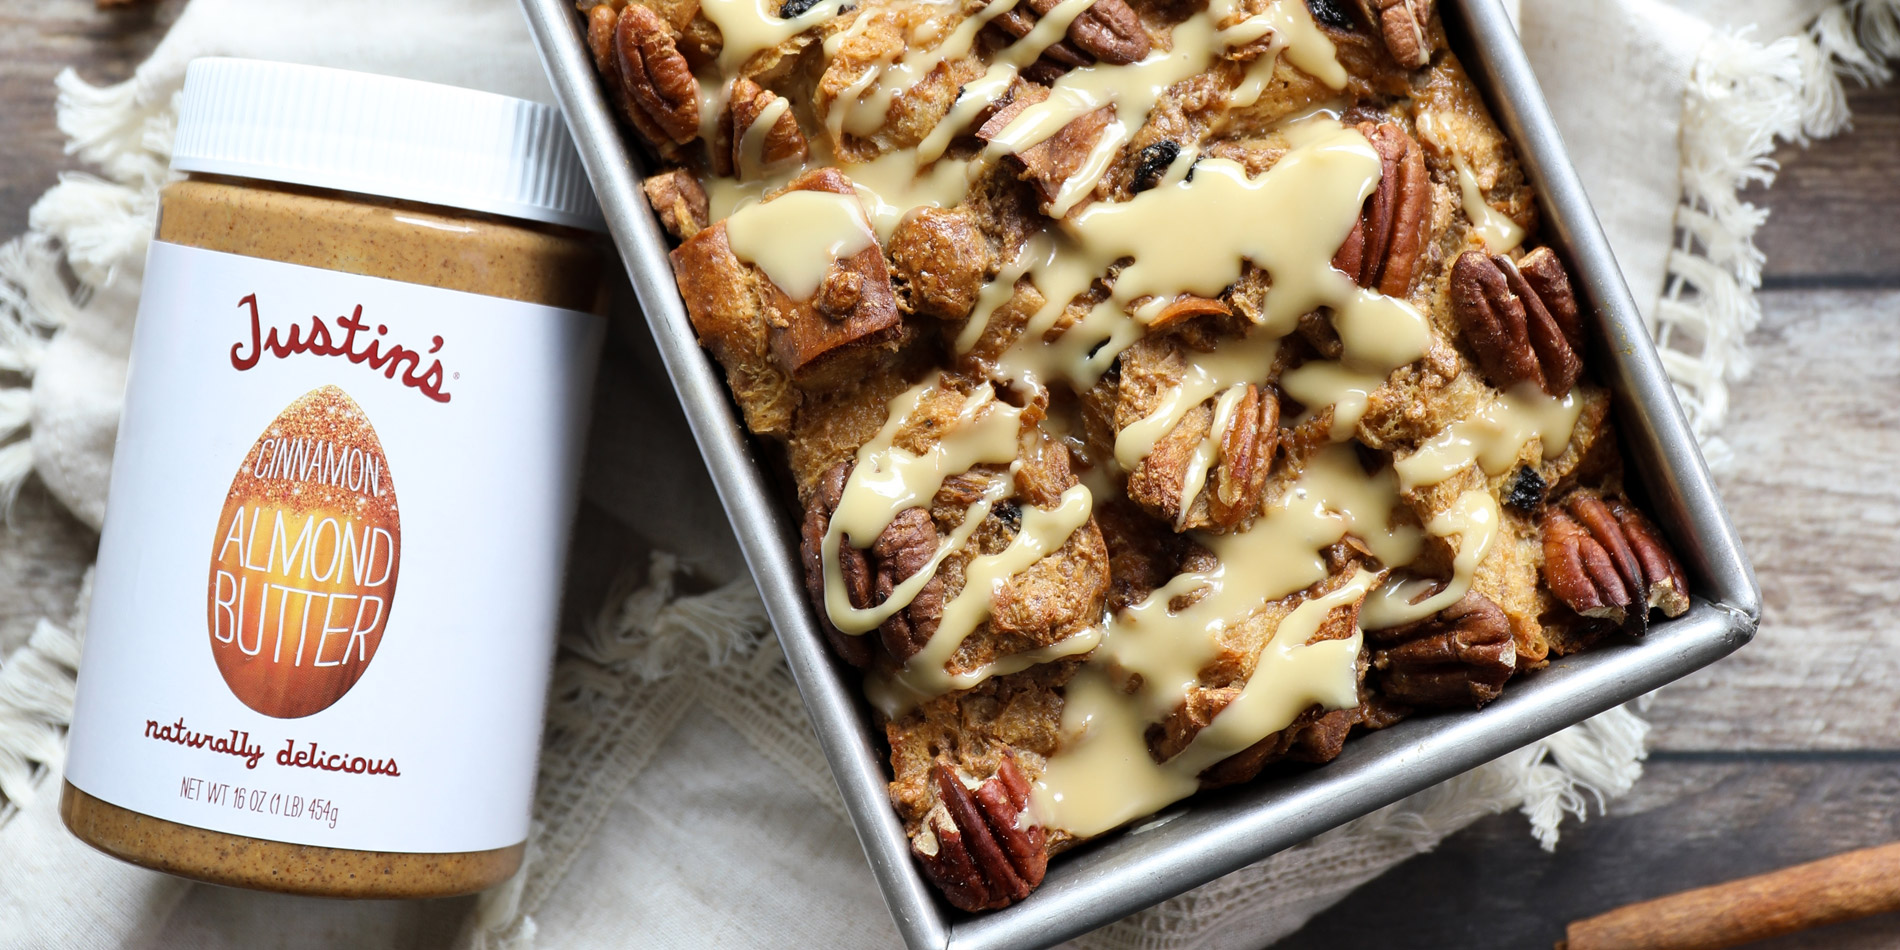 Cinnamon Almond Butter Bread Pudding Loaf in a tray with cinnamon sticks, oven mitts, and blue dishes in a wooden background